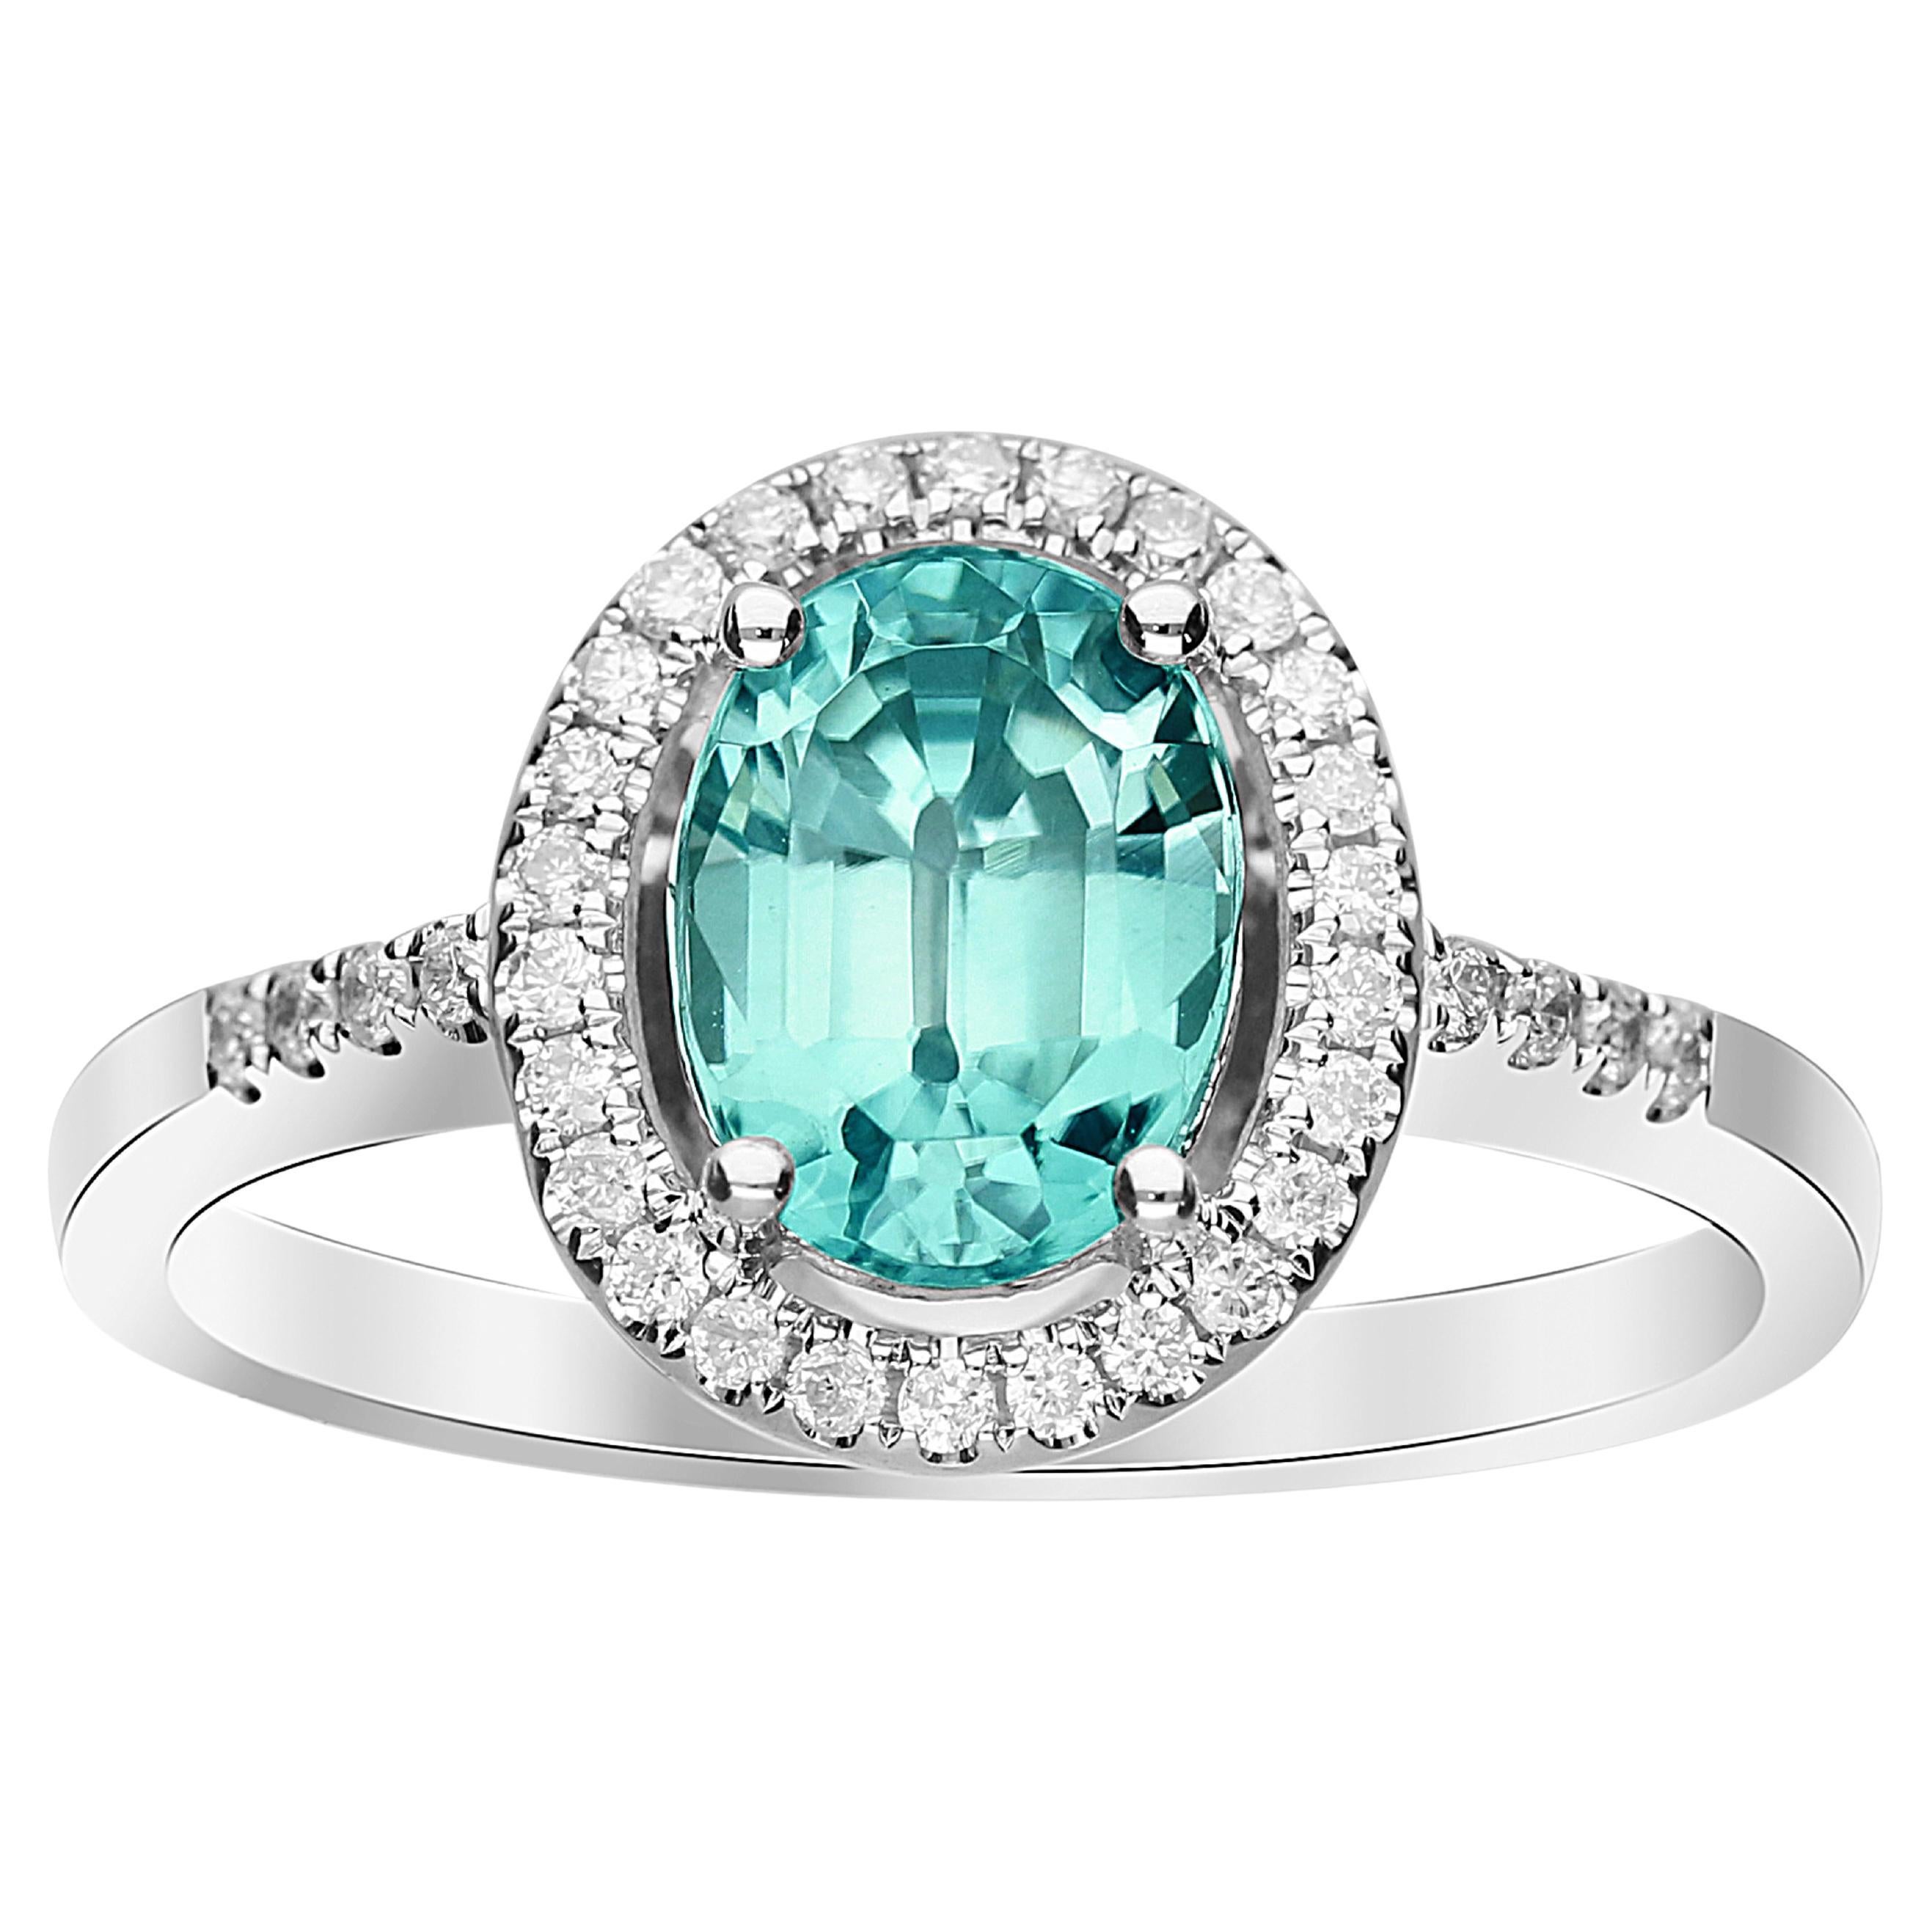 1.94 Carat Oval-Cut Blue Zircon Diamond Accents 14K White Gold Ring For Sale